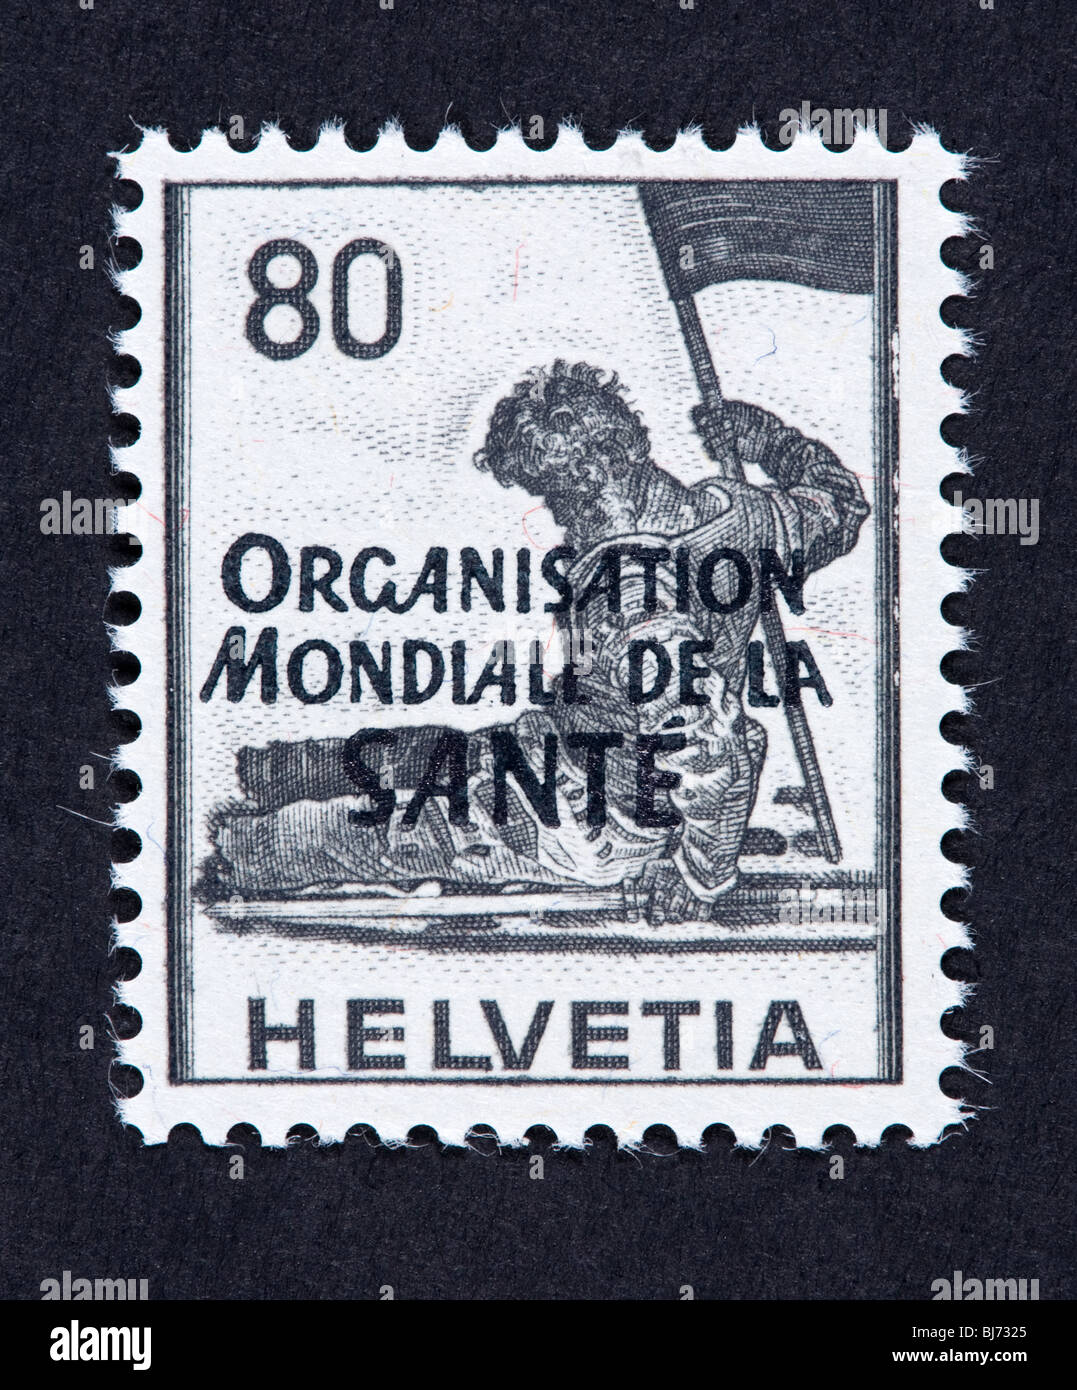 Postage stamp of Switzerland overprinted for use by the World Health Organization, depicting a dying warrior. Stock Photo